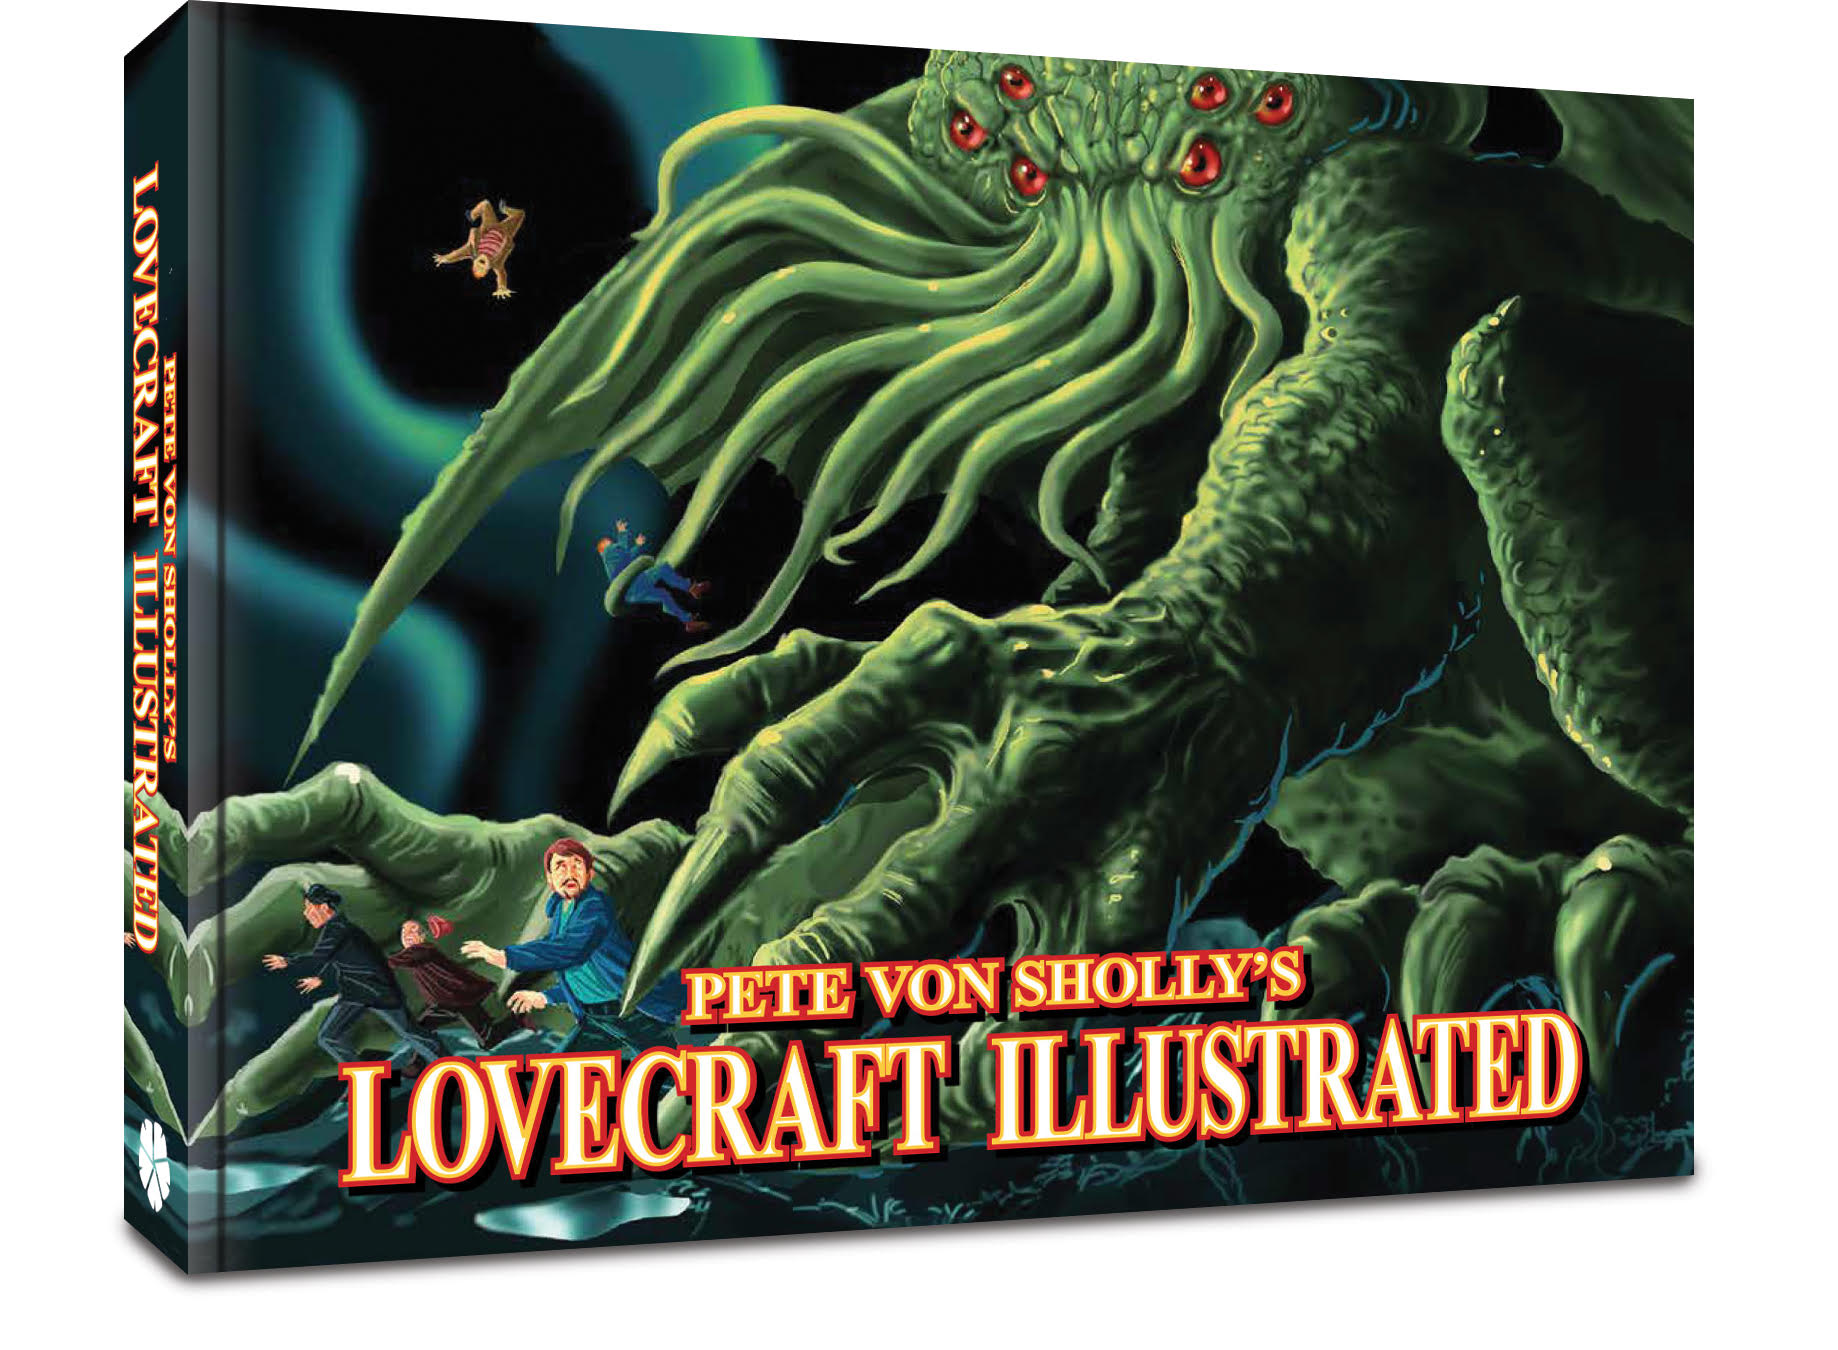 Pete Von Sholly Lovecraft Illstrated Soft Cover